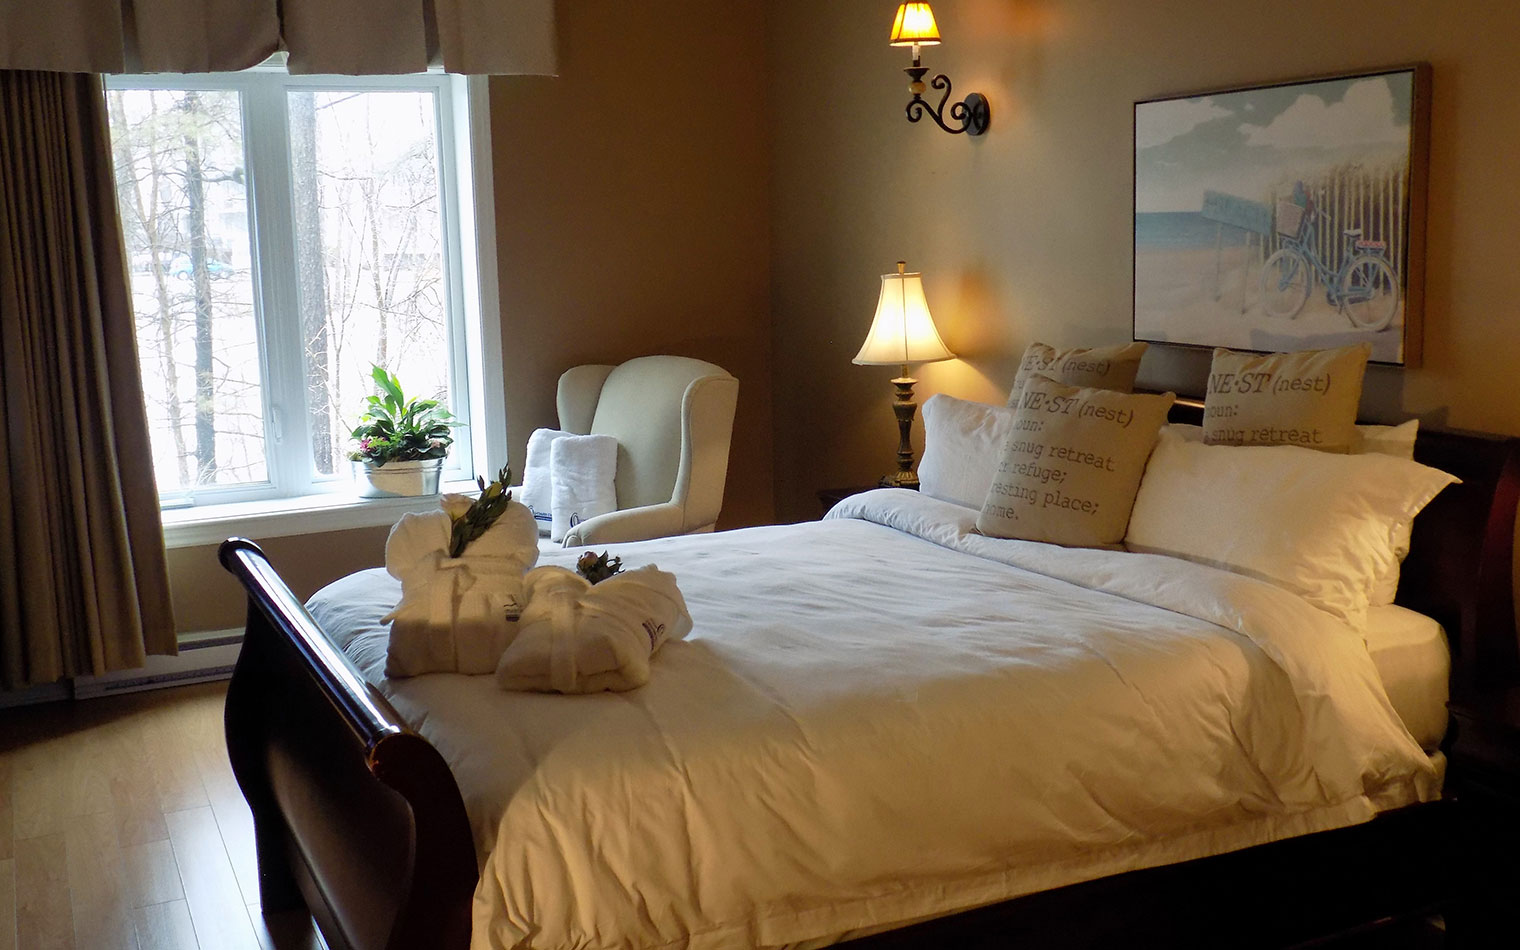 Queen bed for a romantic getaway, great activity for couples - Laval, St-Eustache